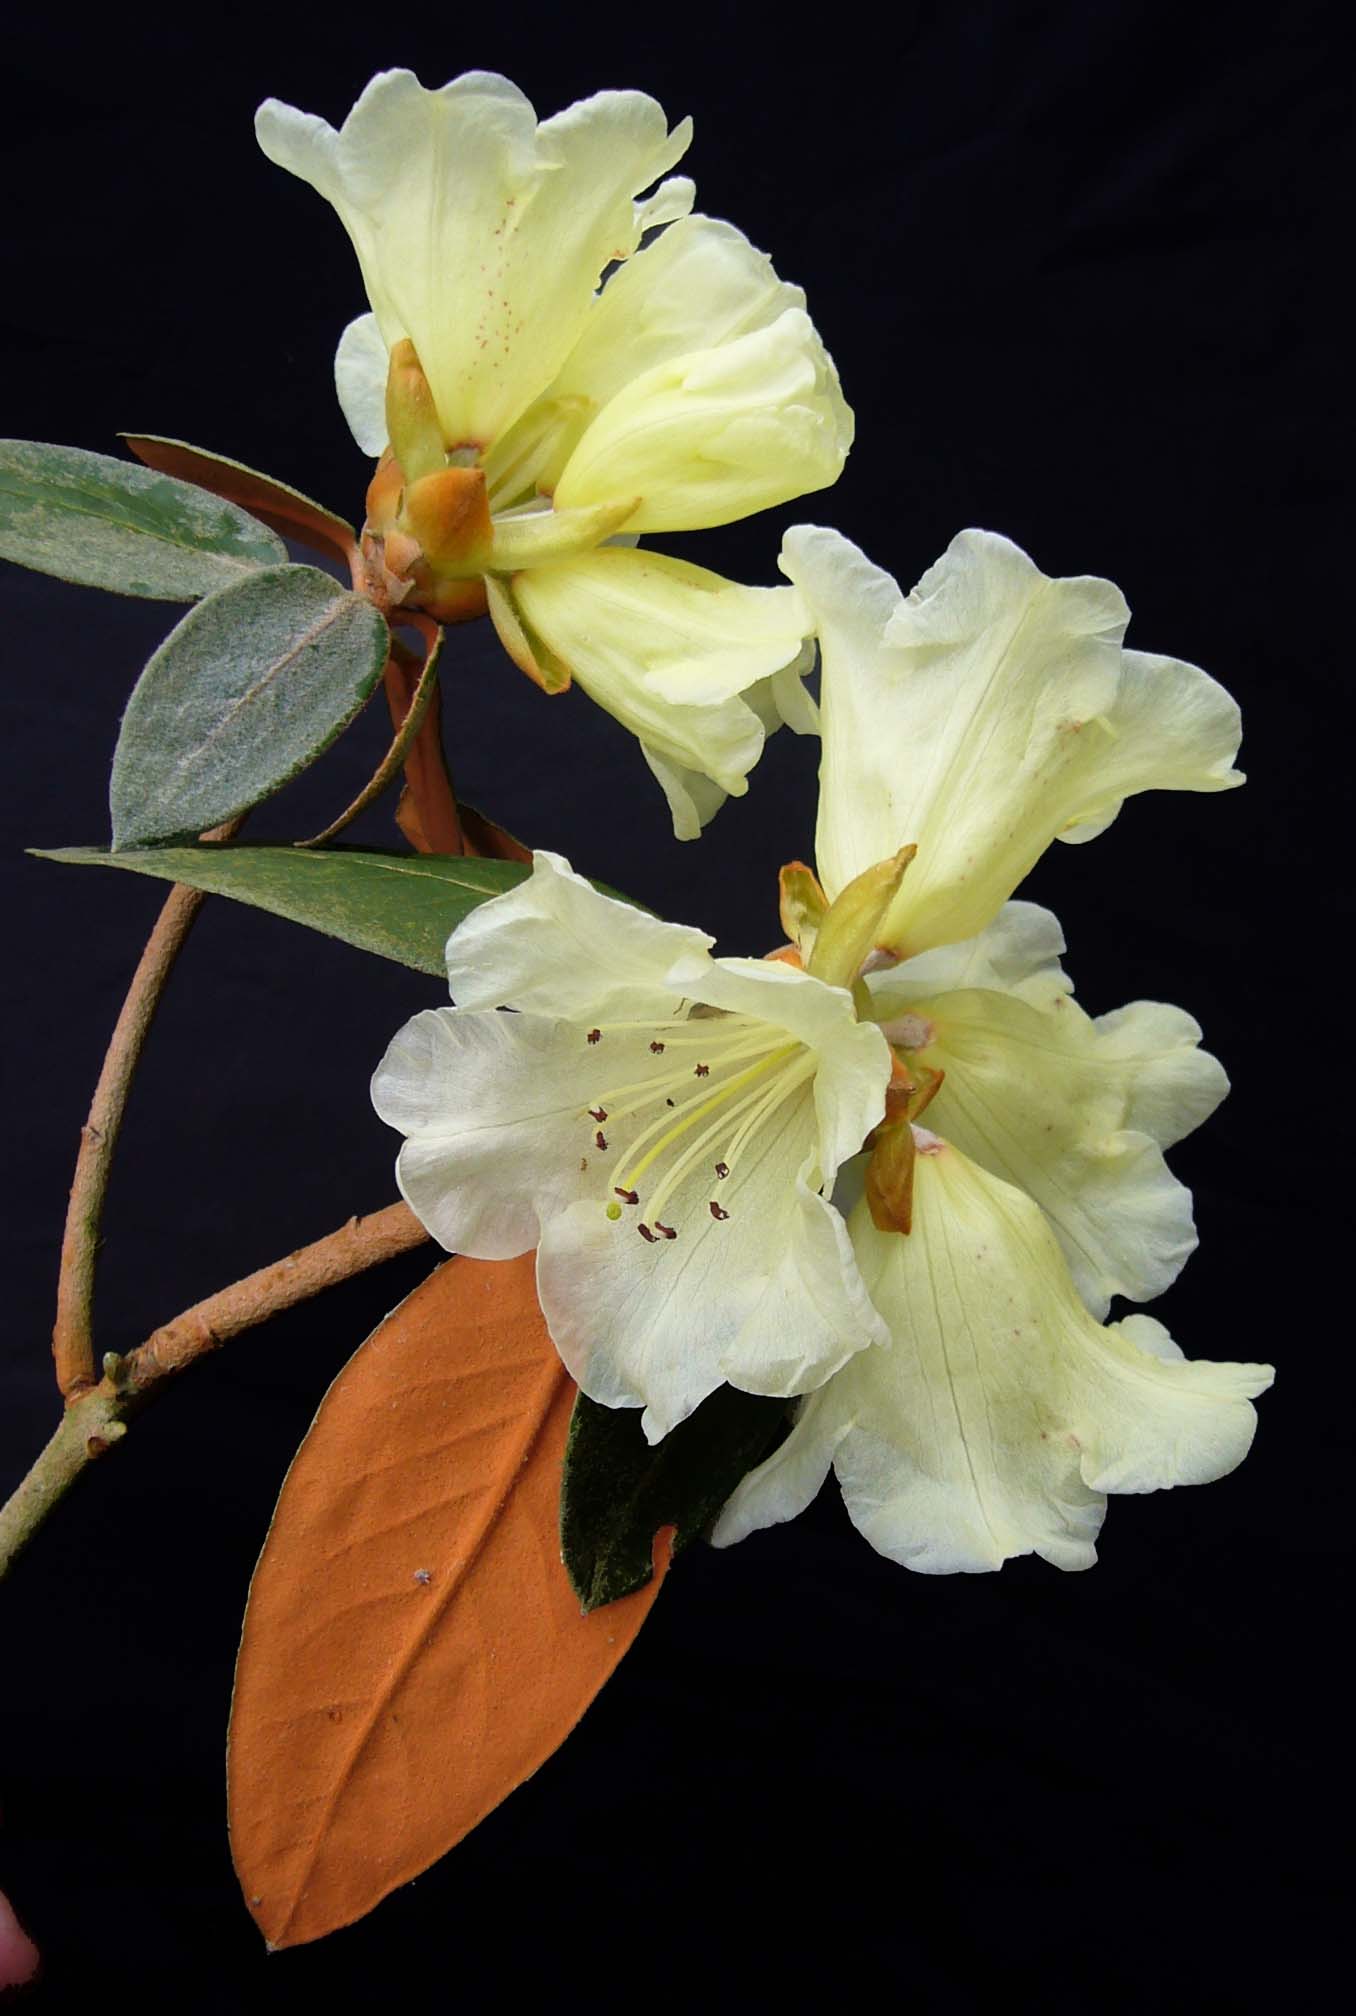 FLINCKII cream-yellow Rhododendron Larger Species Rhododendrons